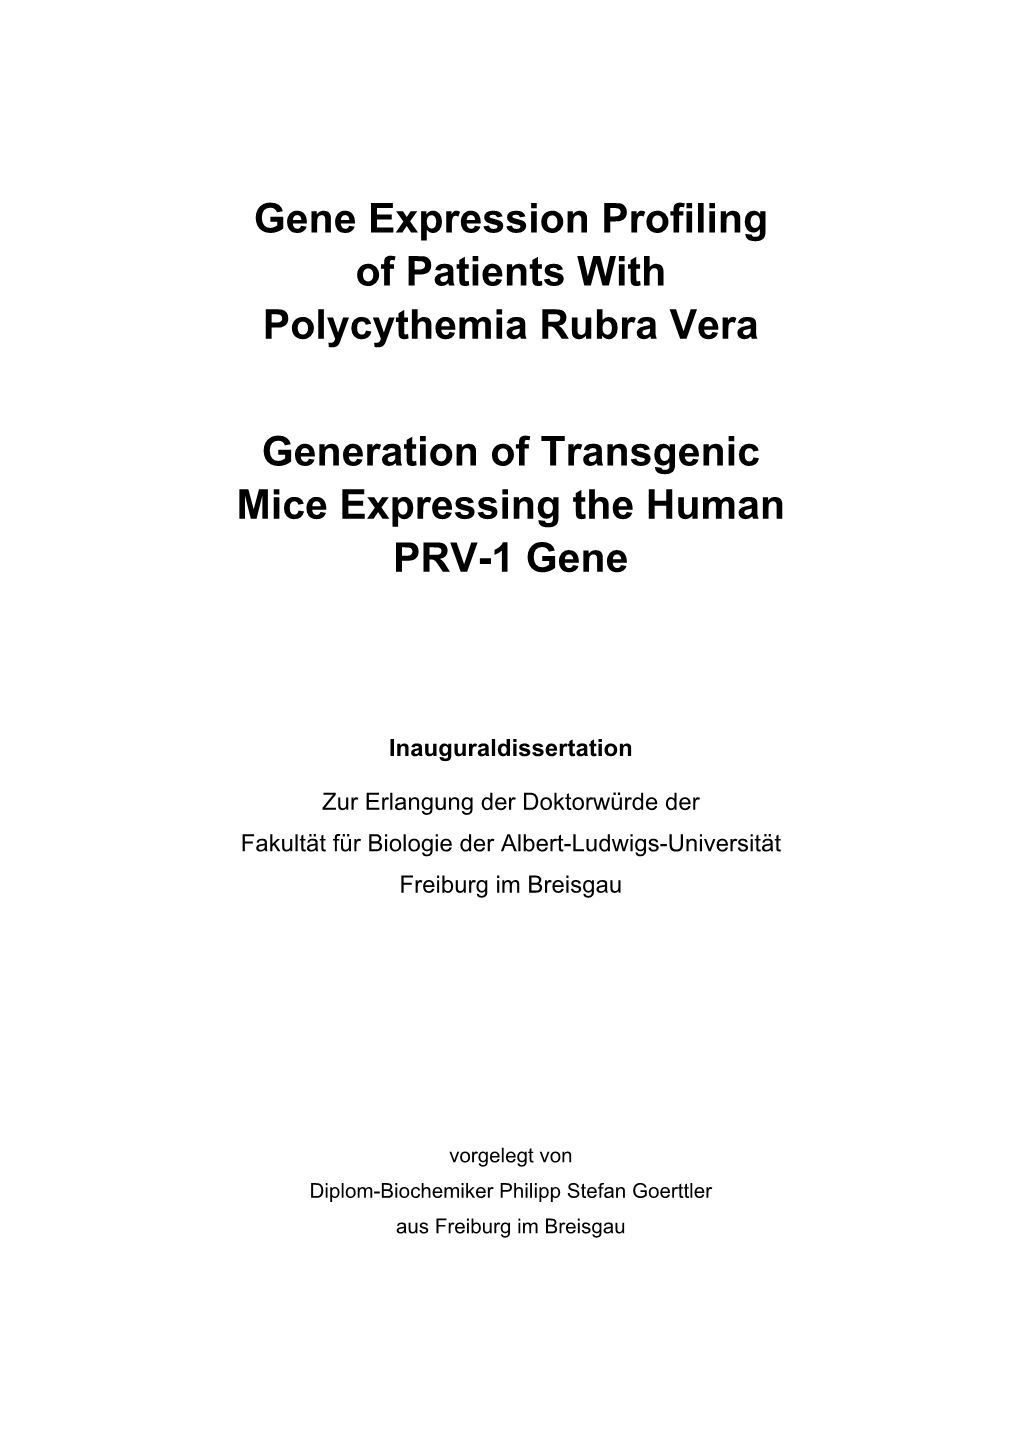 Gene Expression Profiling of Patients with Polycythemia Rubra Vera